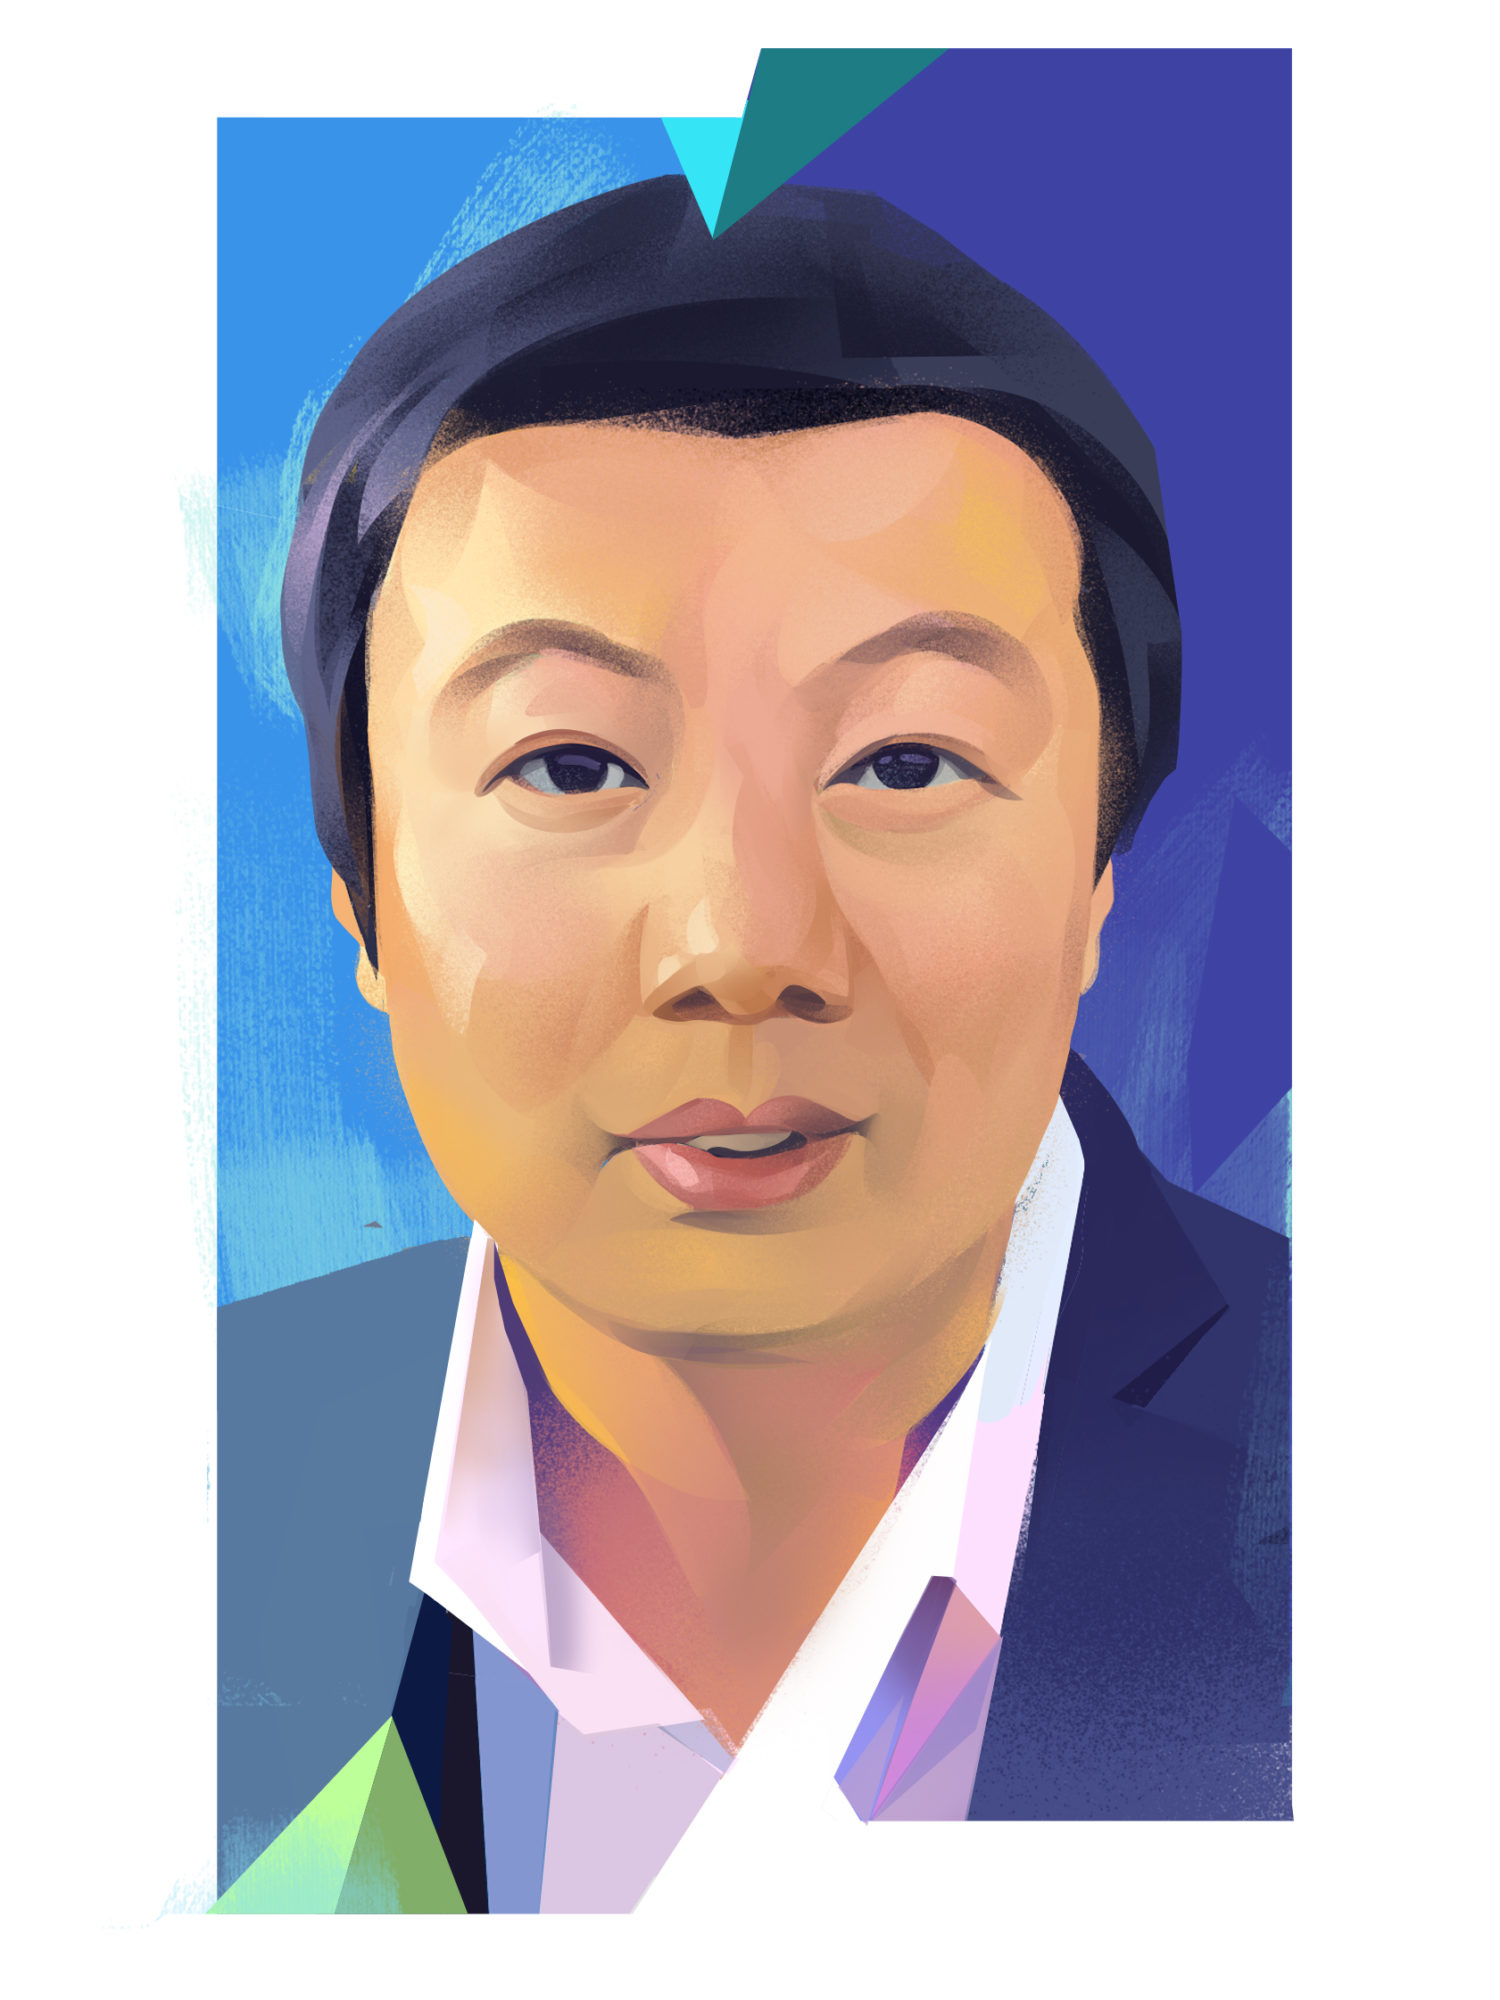 Illustration Dr. Bo Wang with blue, purple and green background